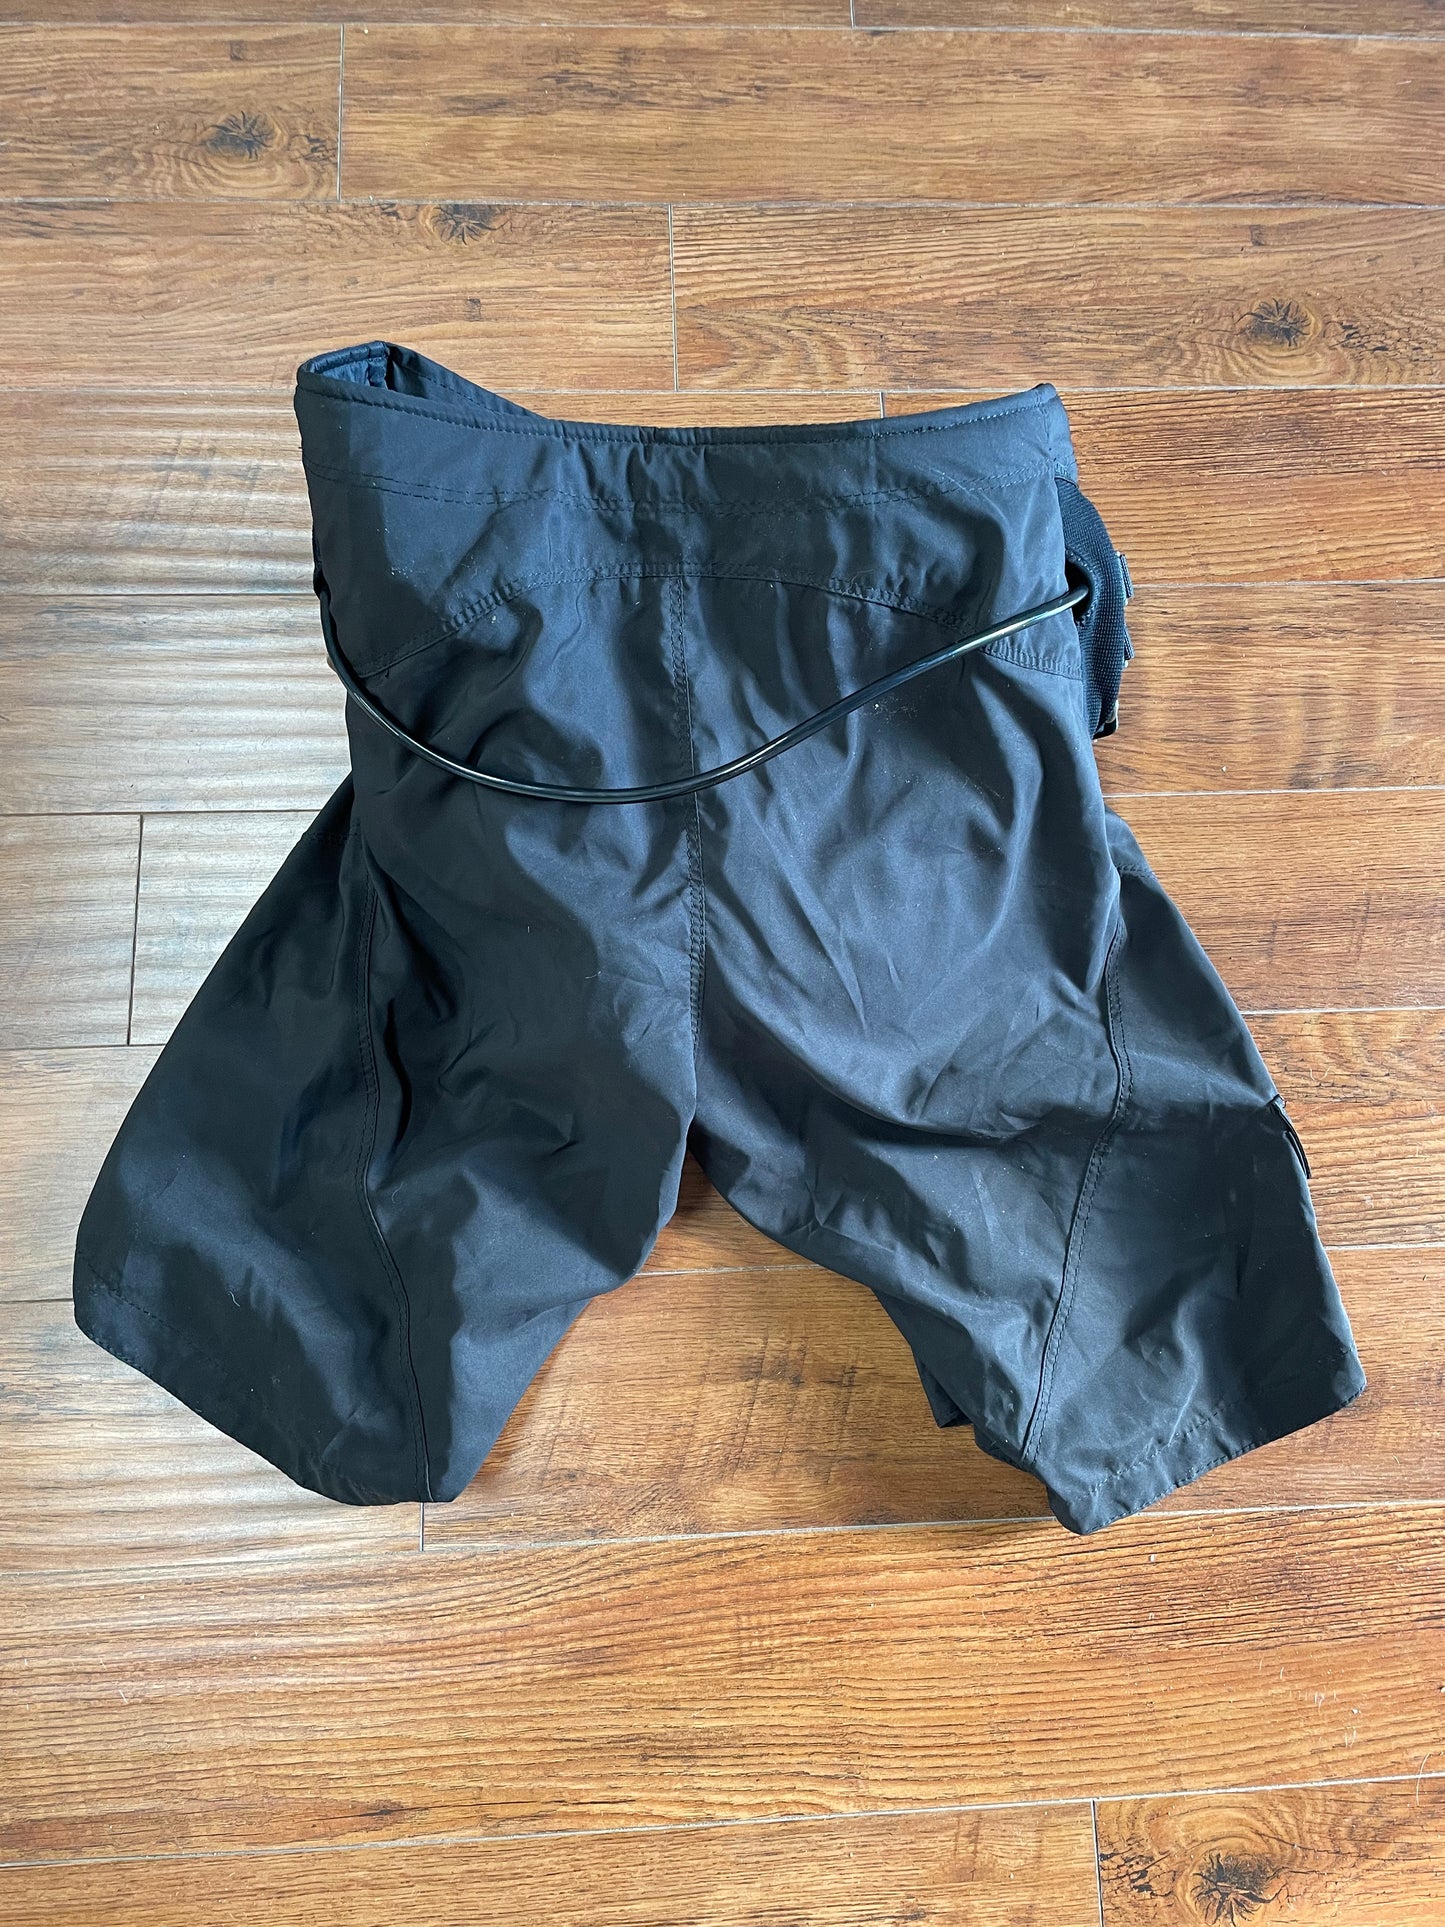 USED DAKINE SEAT HARNESS SHORTS XL WITH SPREADER BAR